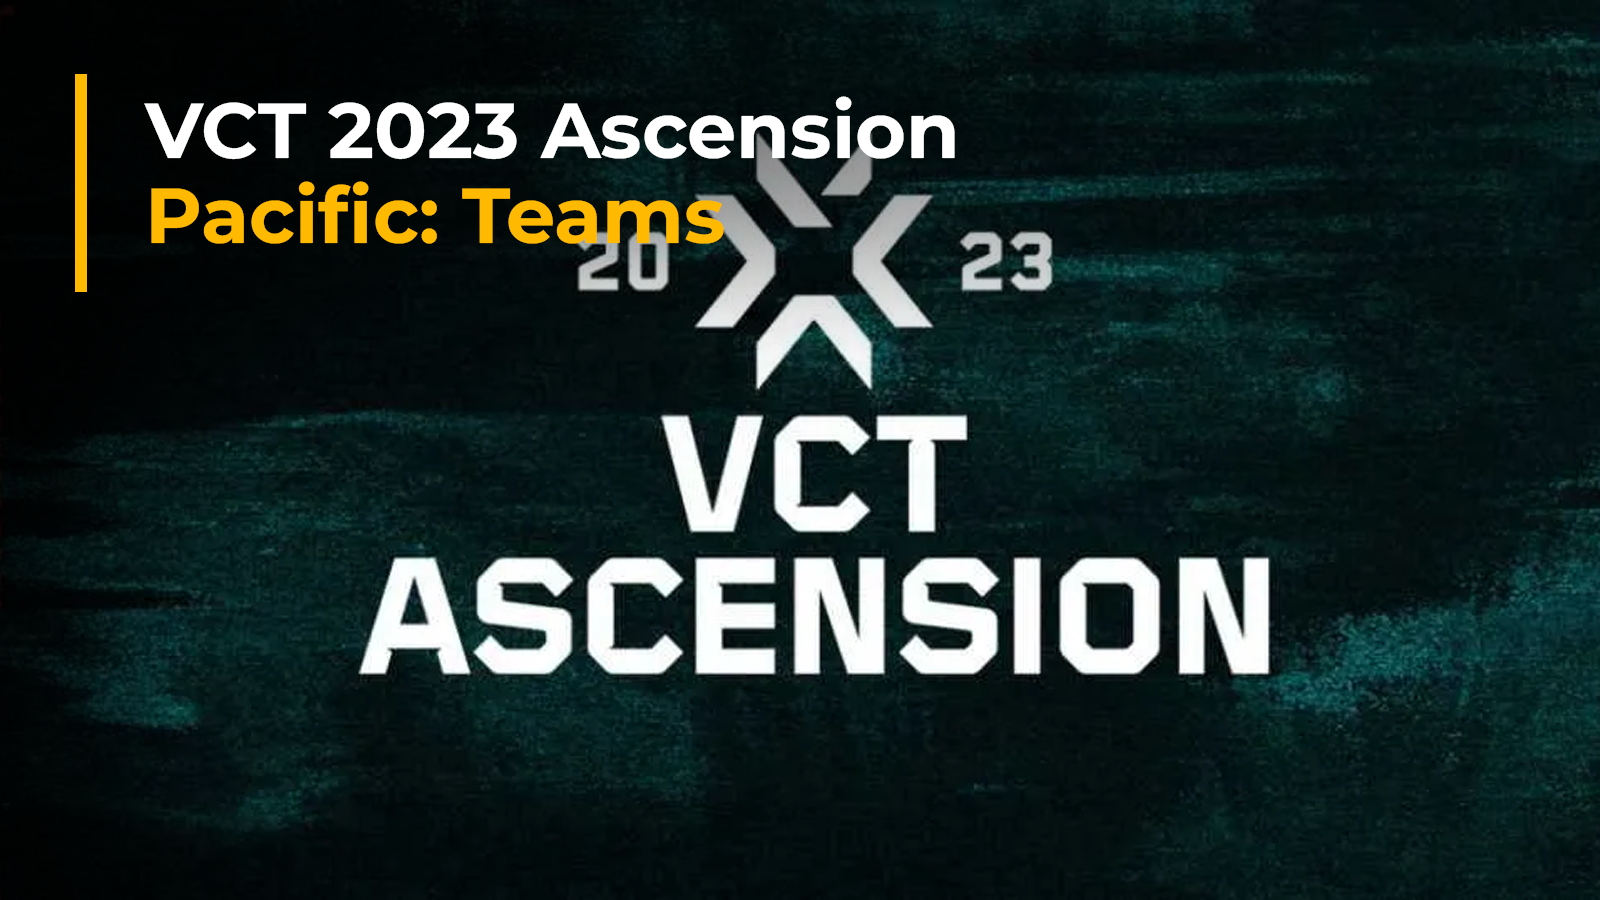 VCT 2023 Ascension Pacific: Teams, Schedule, Results, Format, Livestream, More 